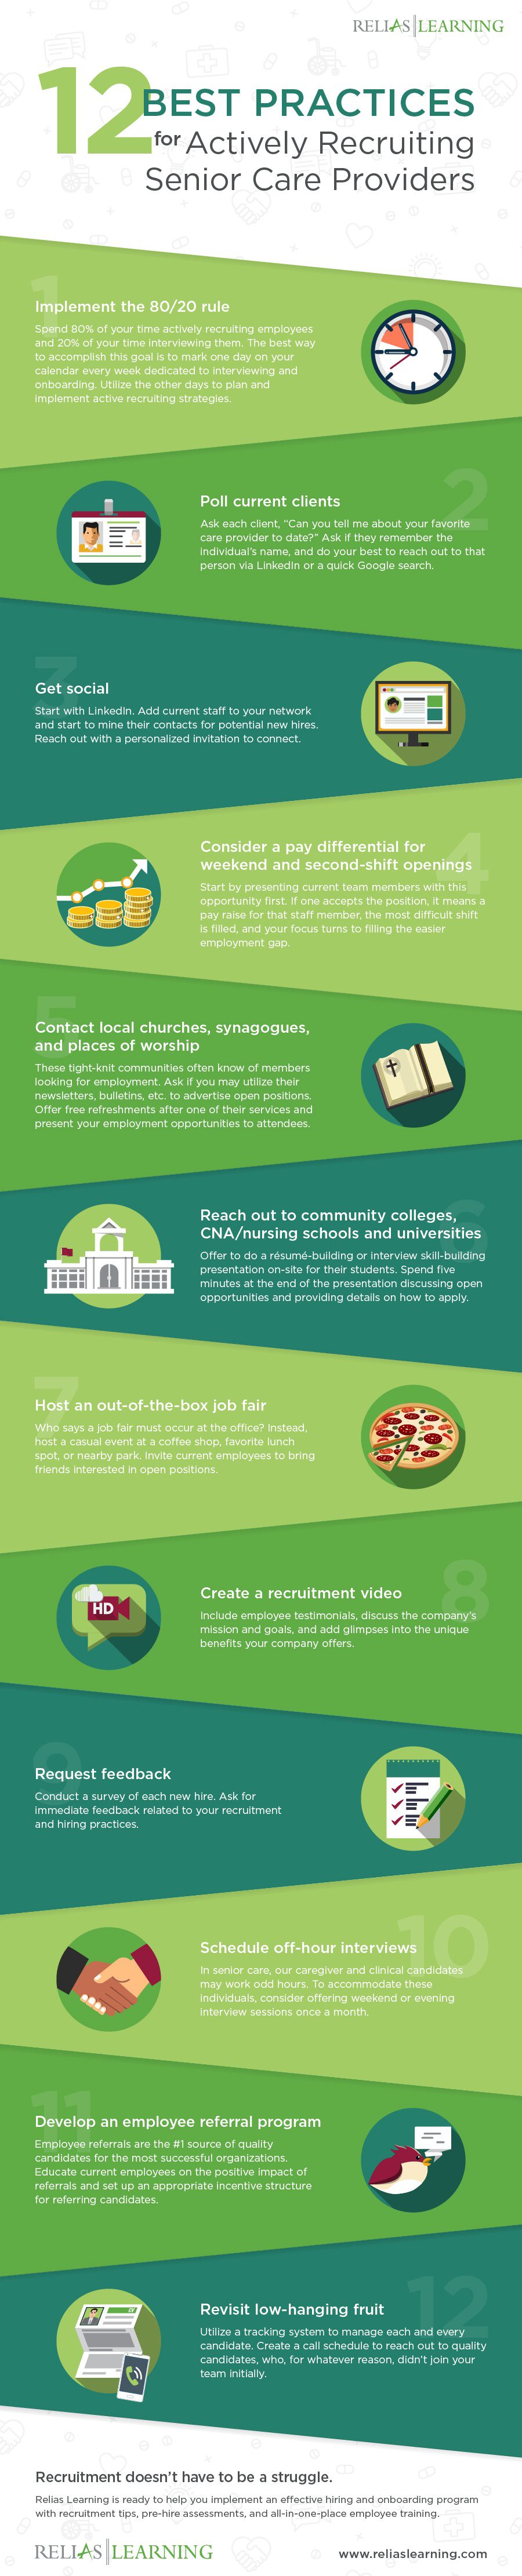 best practices for recruiting senior care providers infographic